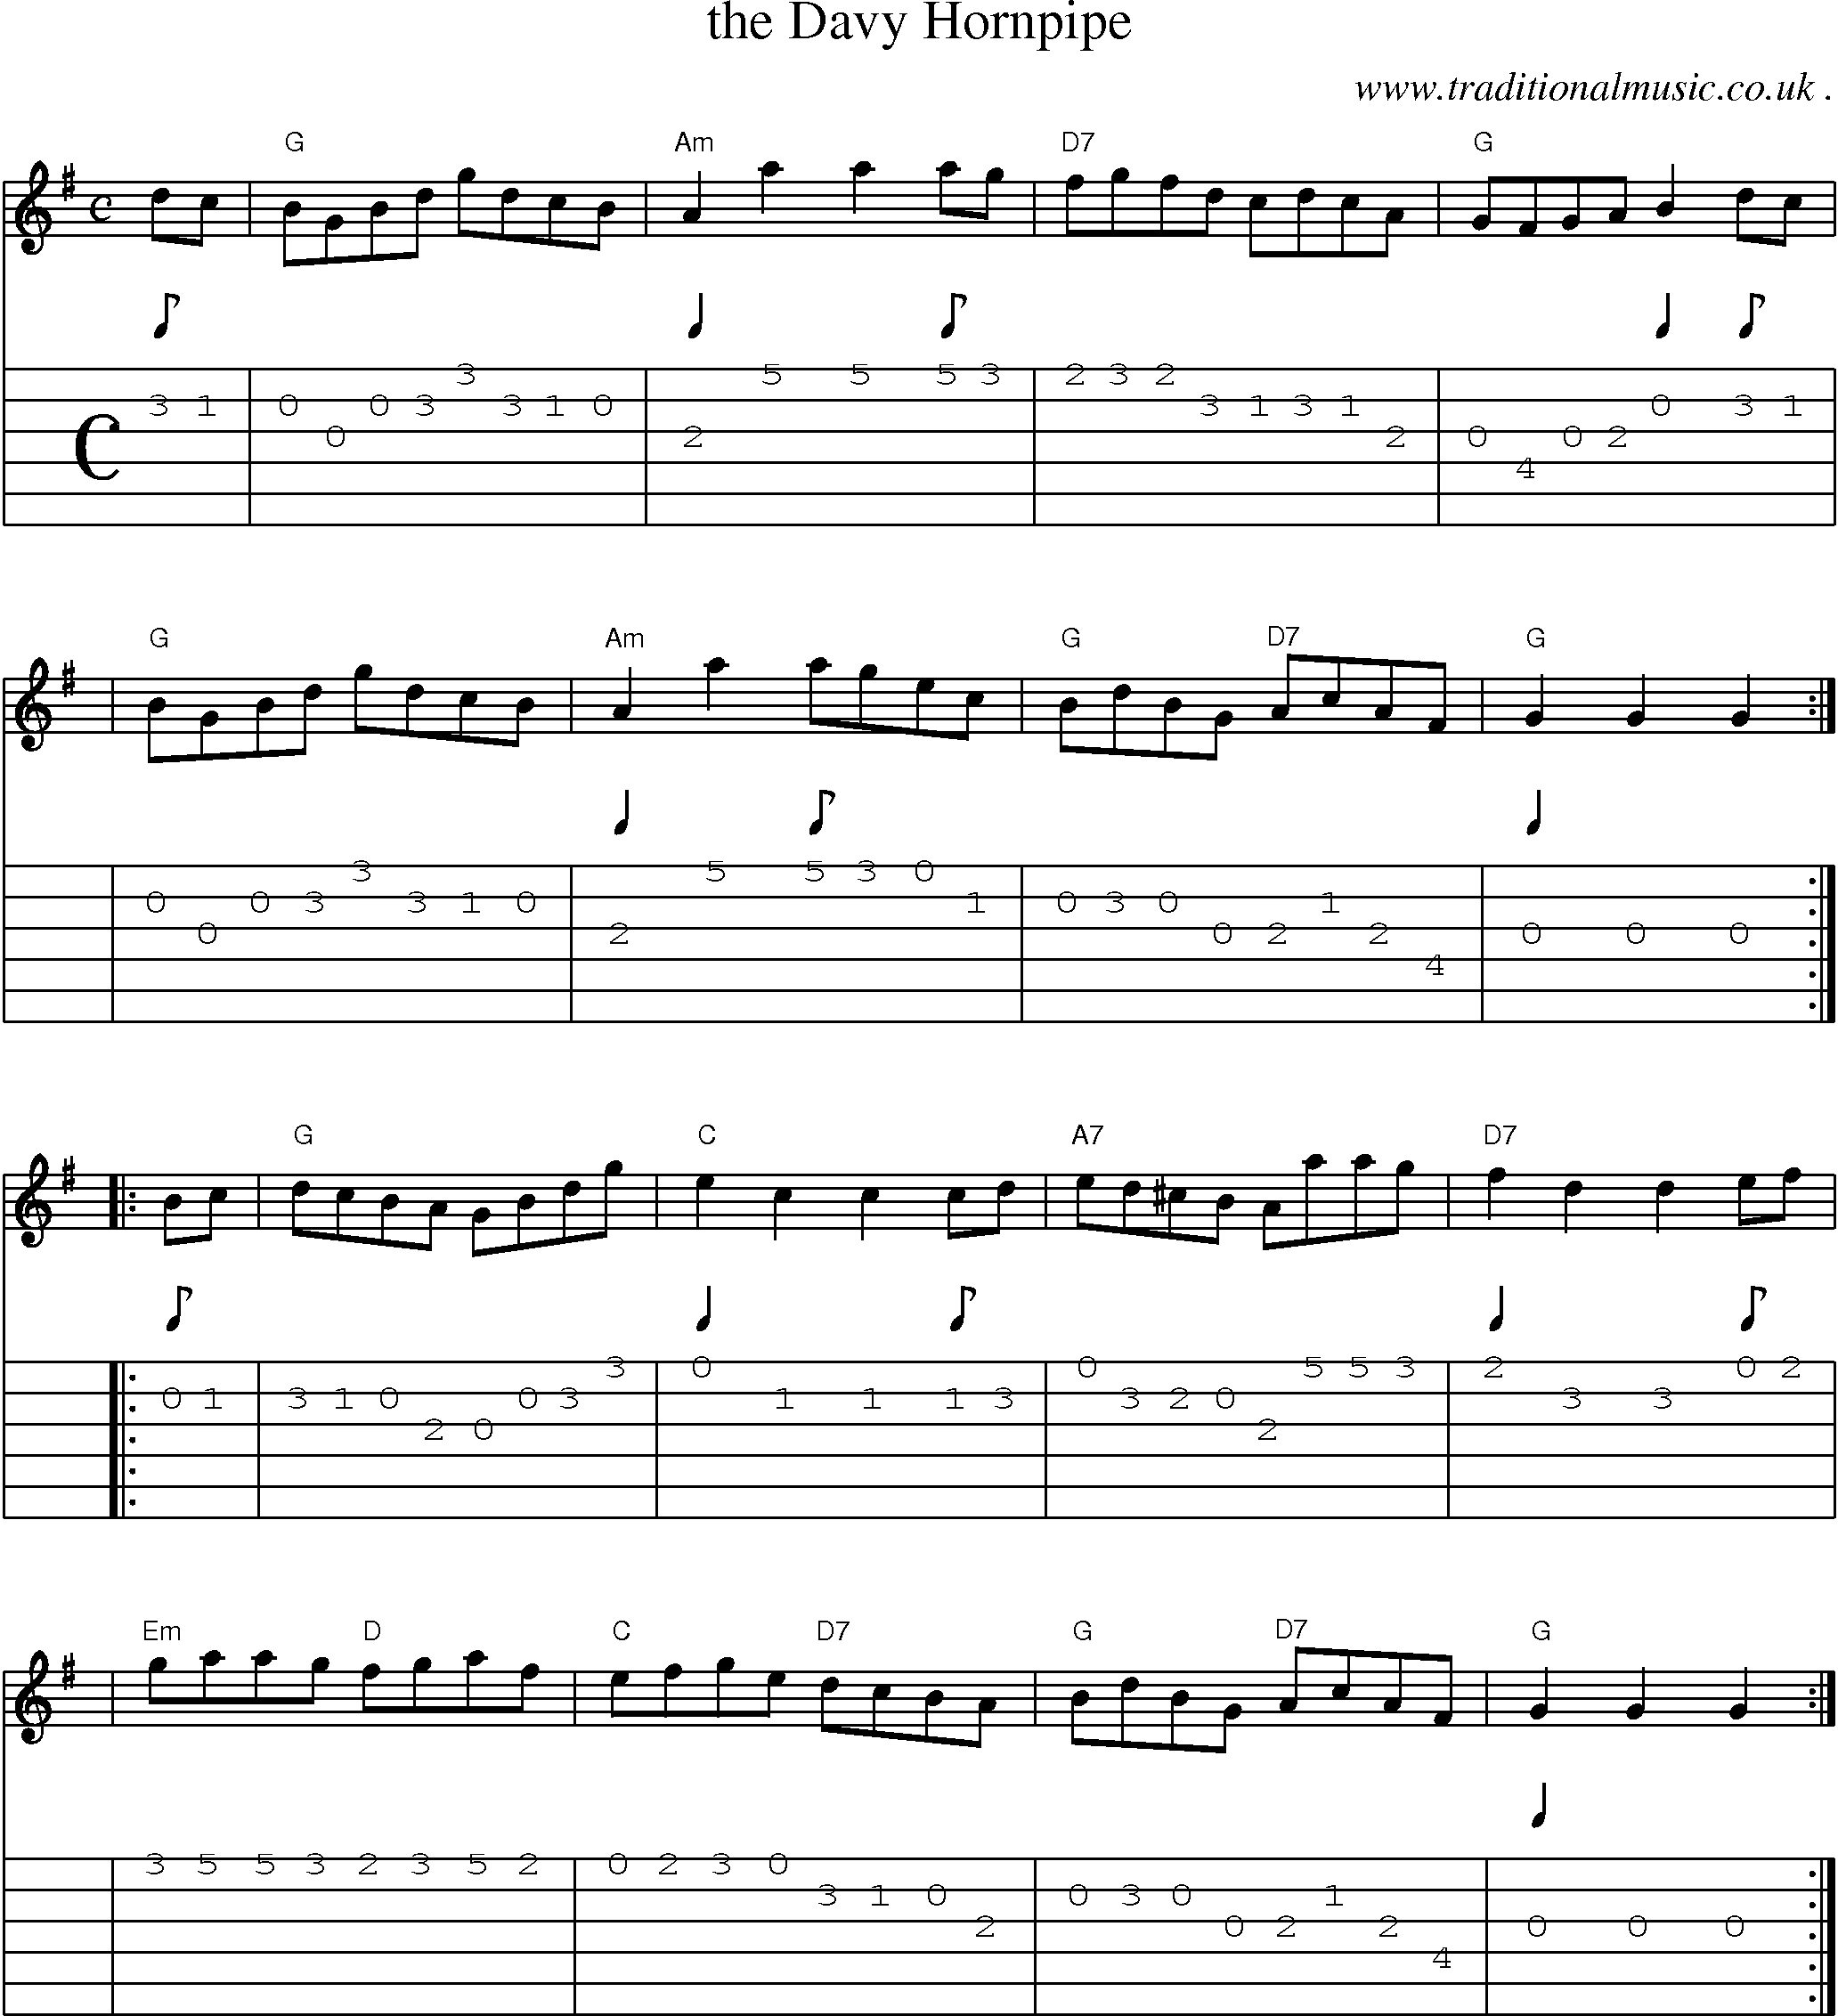 Sheet-music  score, Chords and Guitar Tabs for The Davy Hornpipe